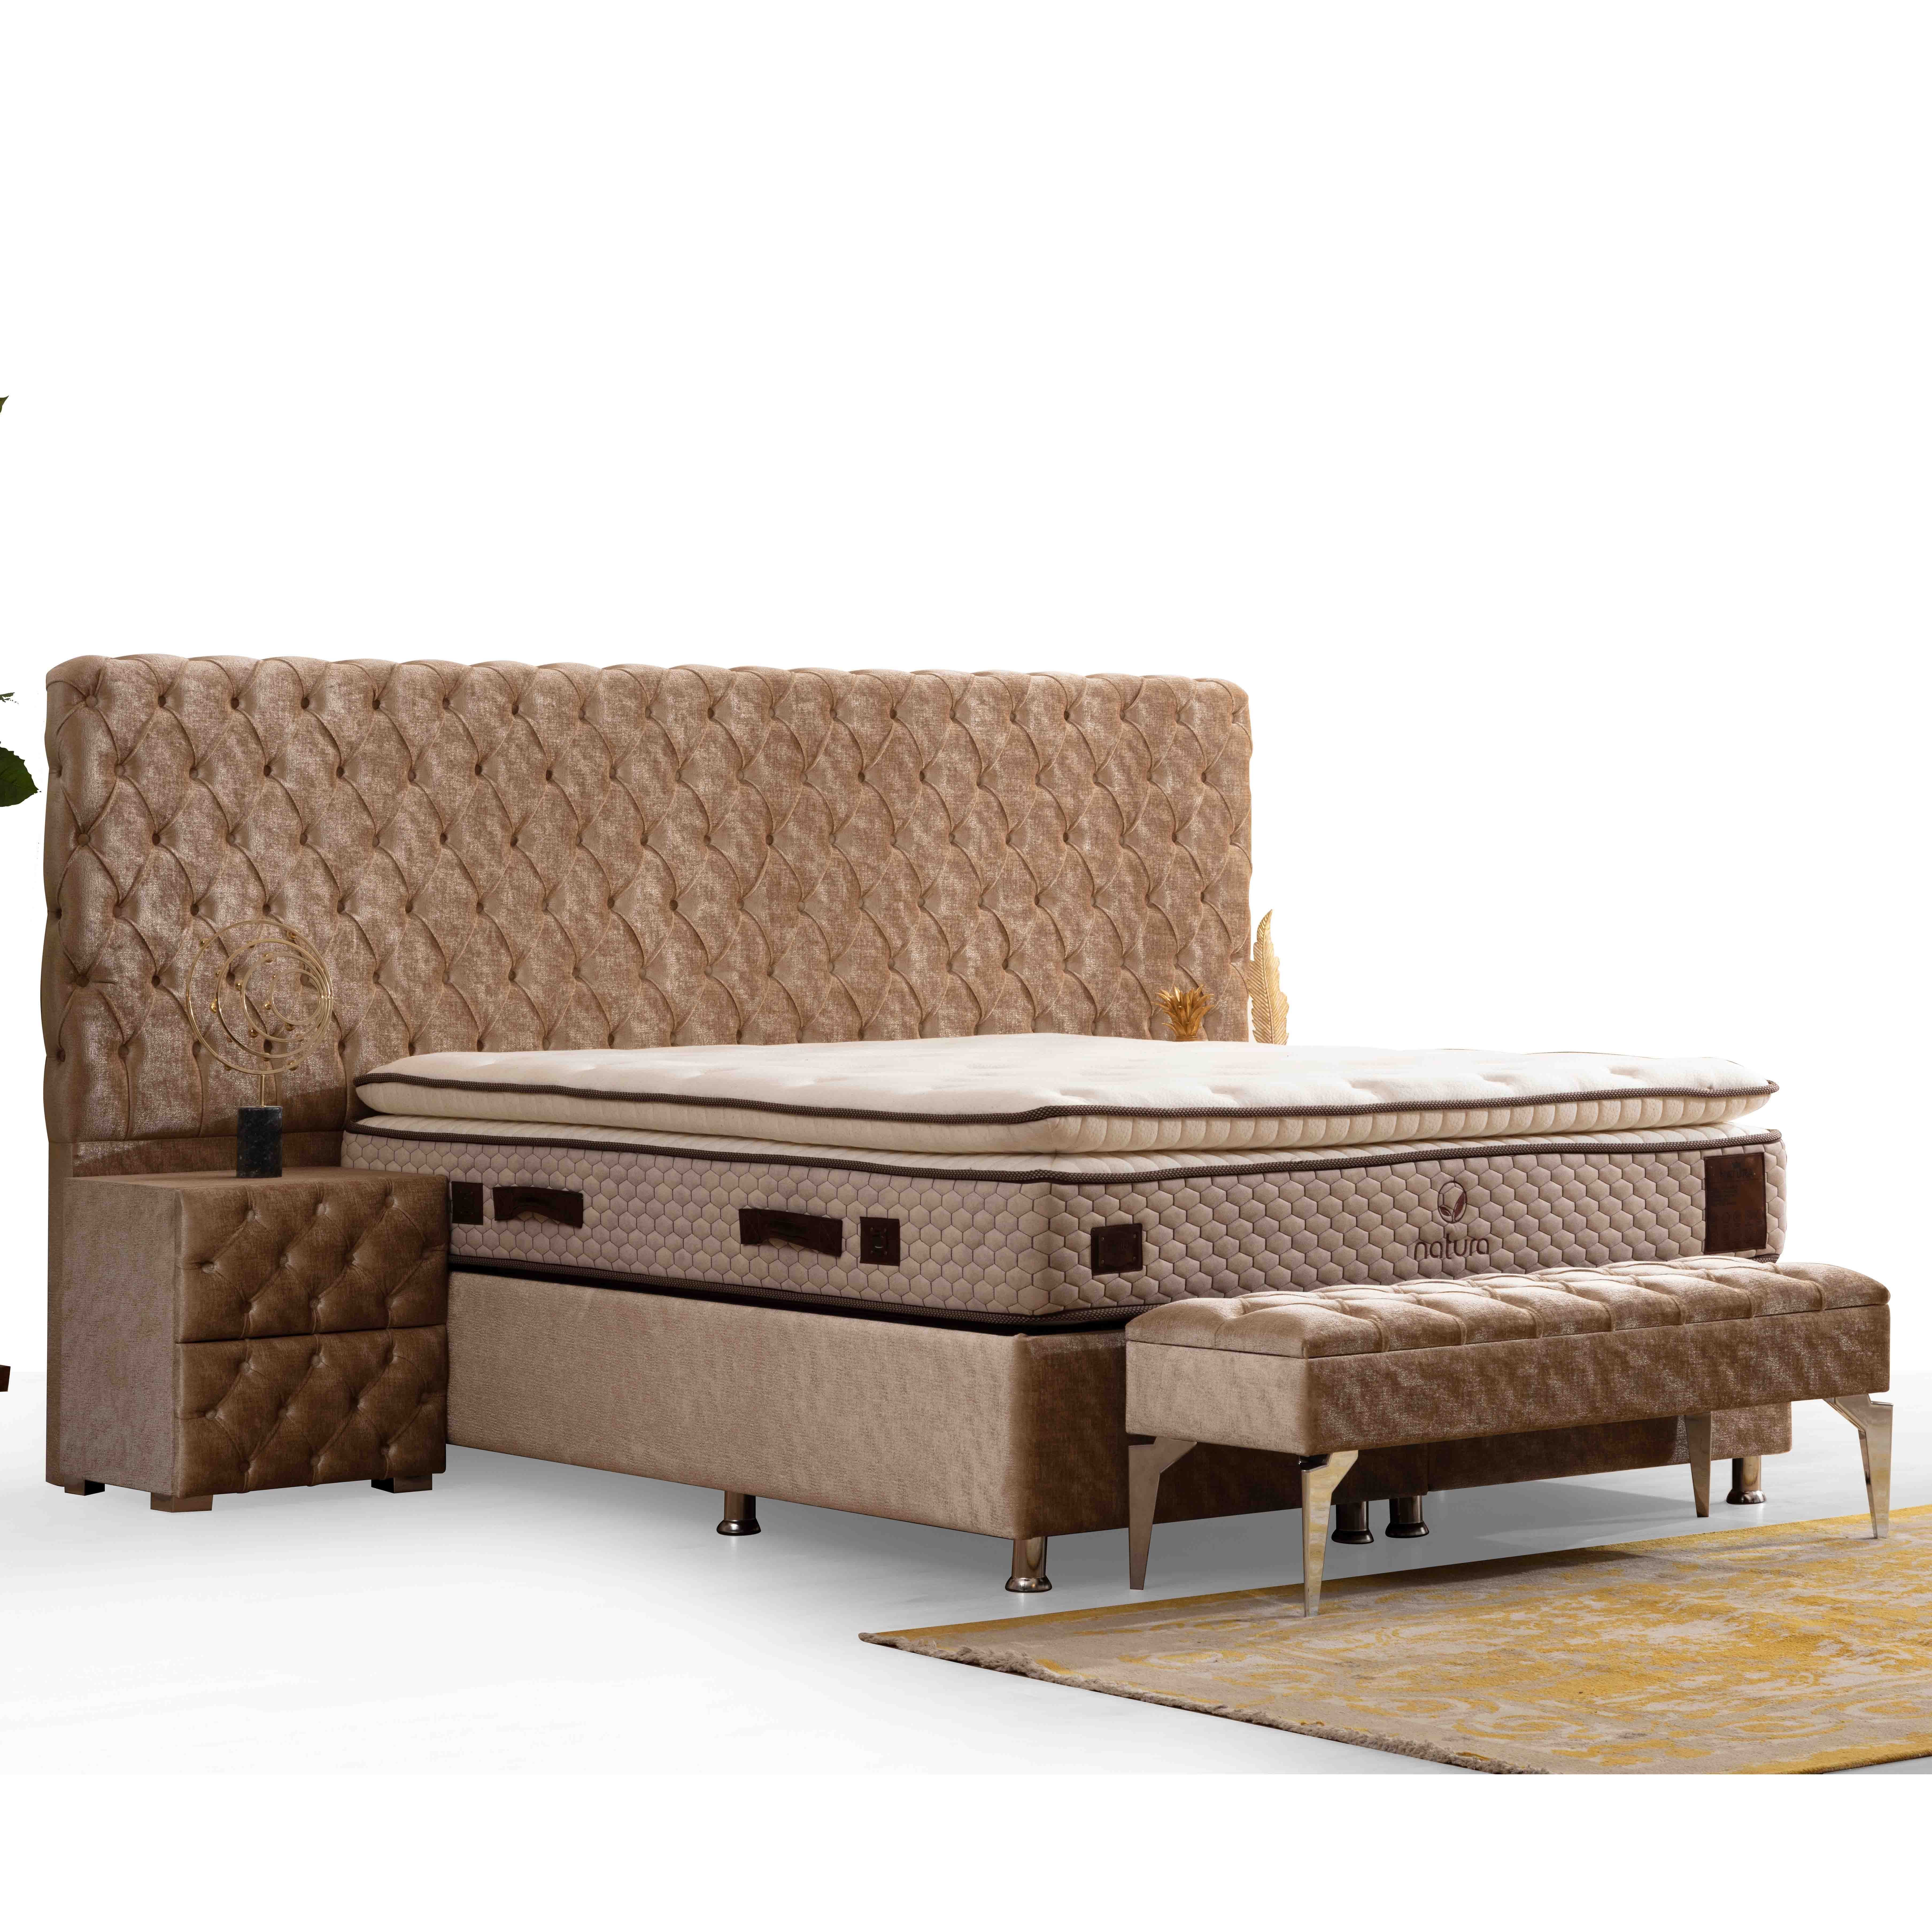 Siena Bed With Storage 120*200